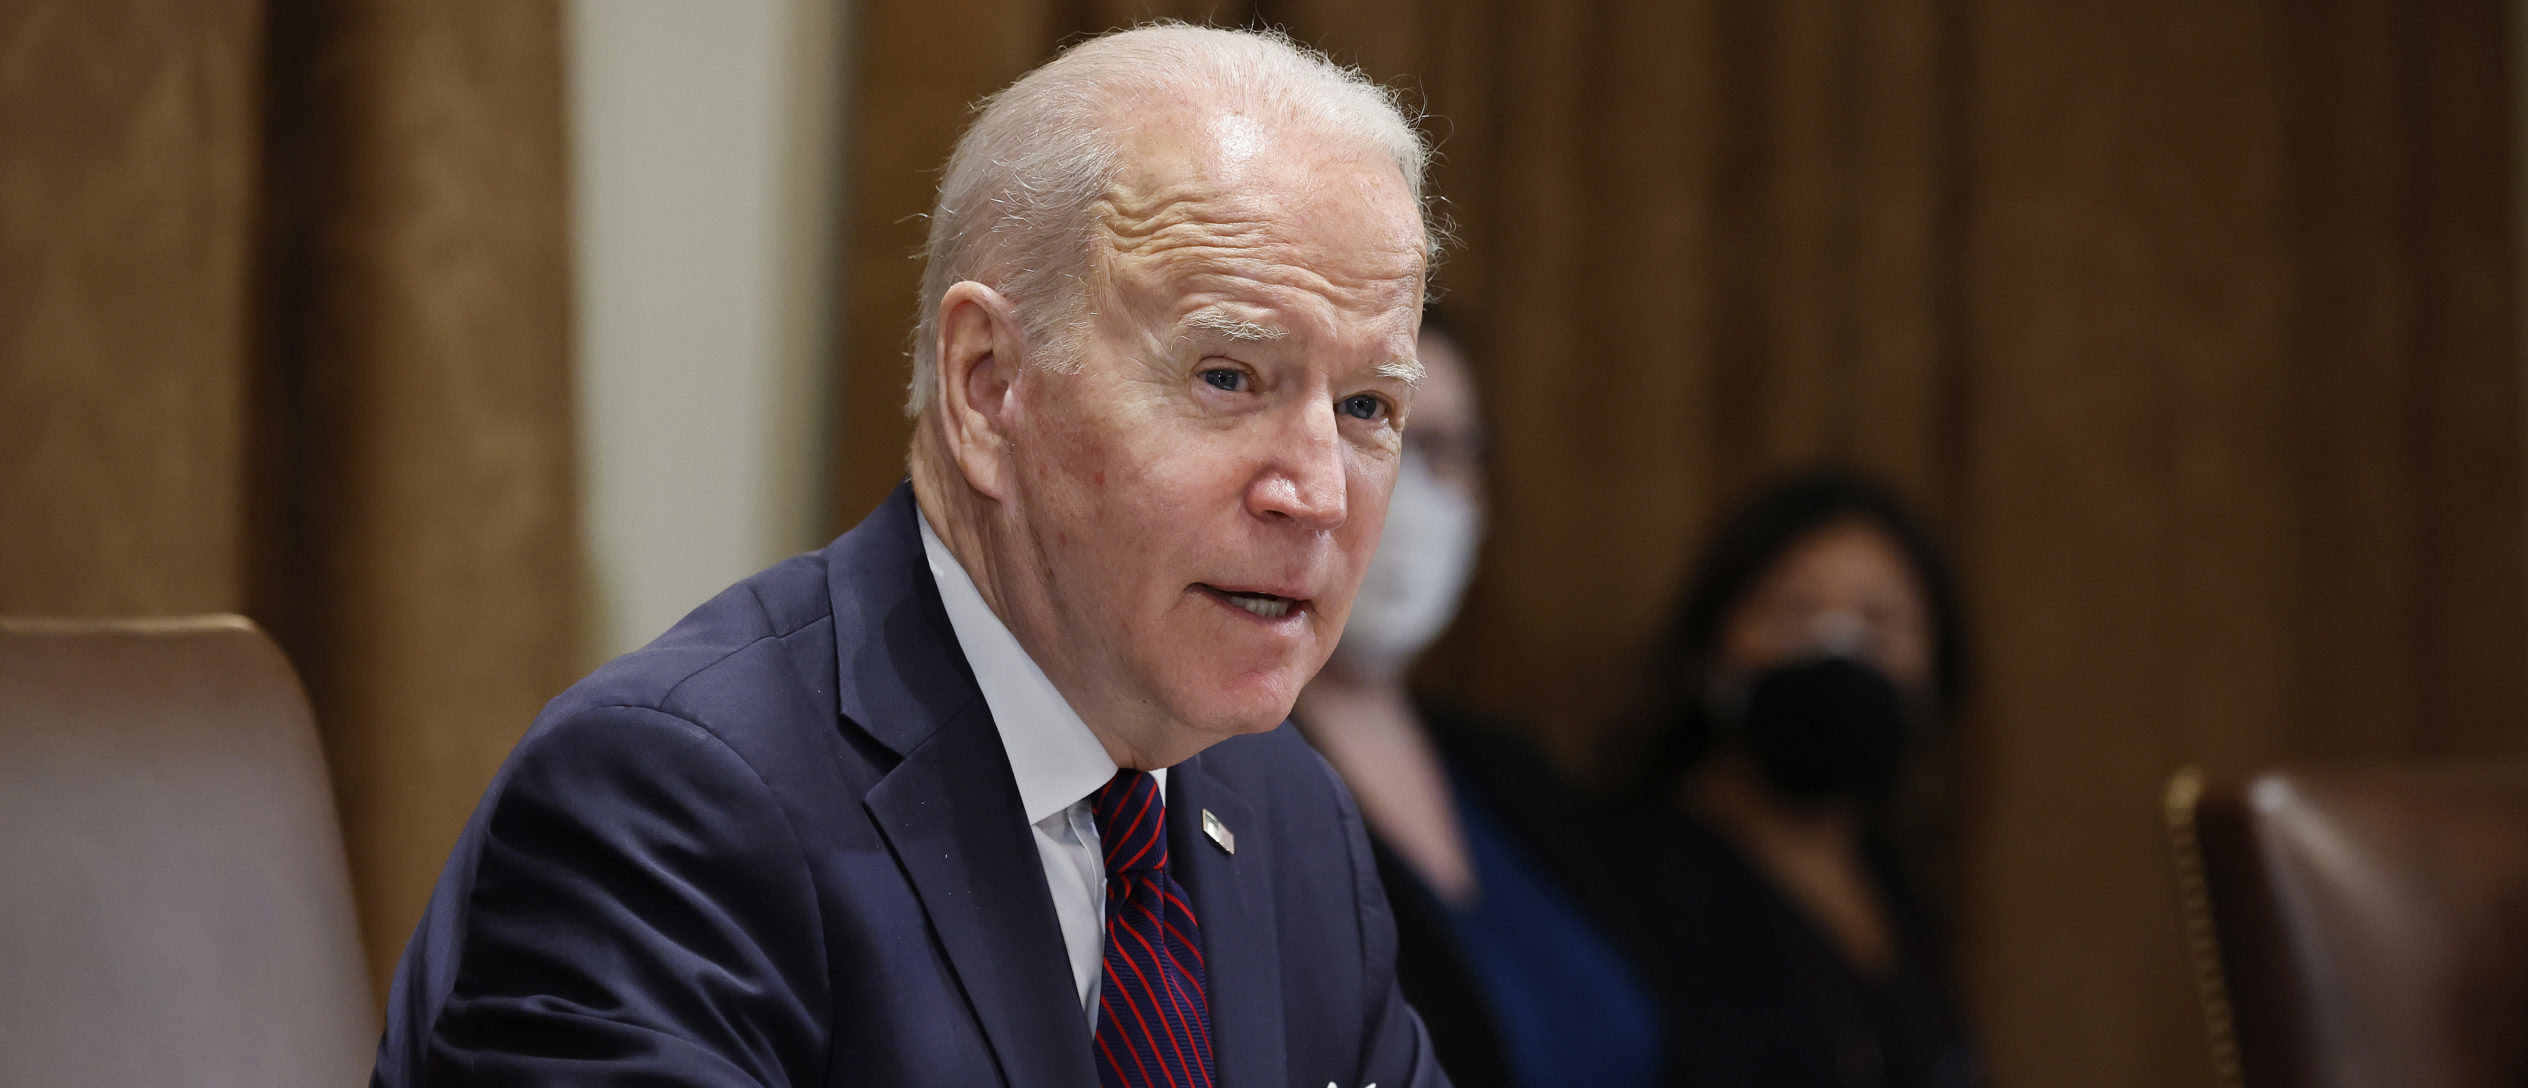 Biden Approves More Troops For Deployment Amid Russia-Ukraine Tensions